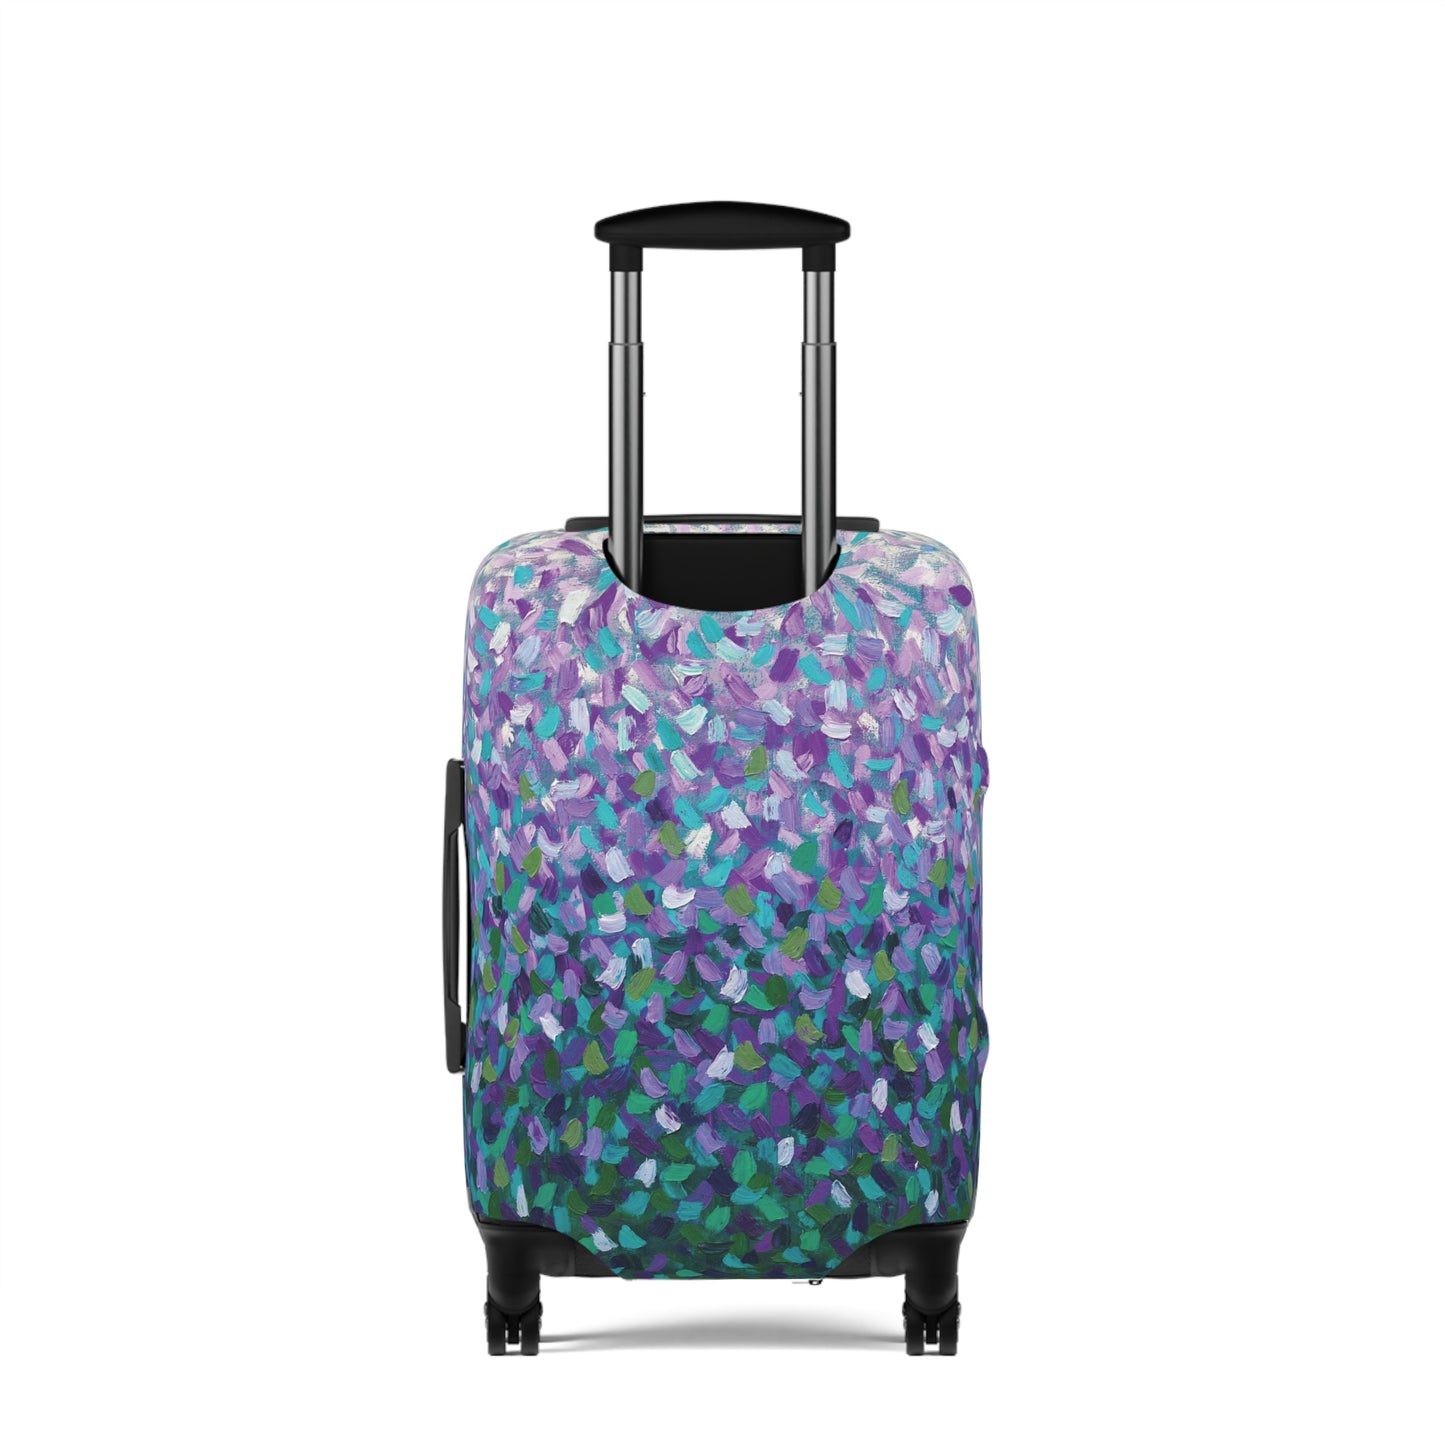 Hunter Valley Dreaming Luggage Cover